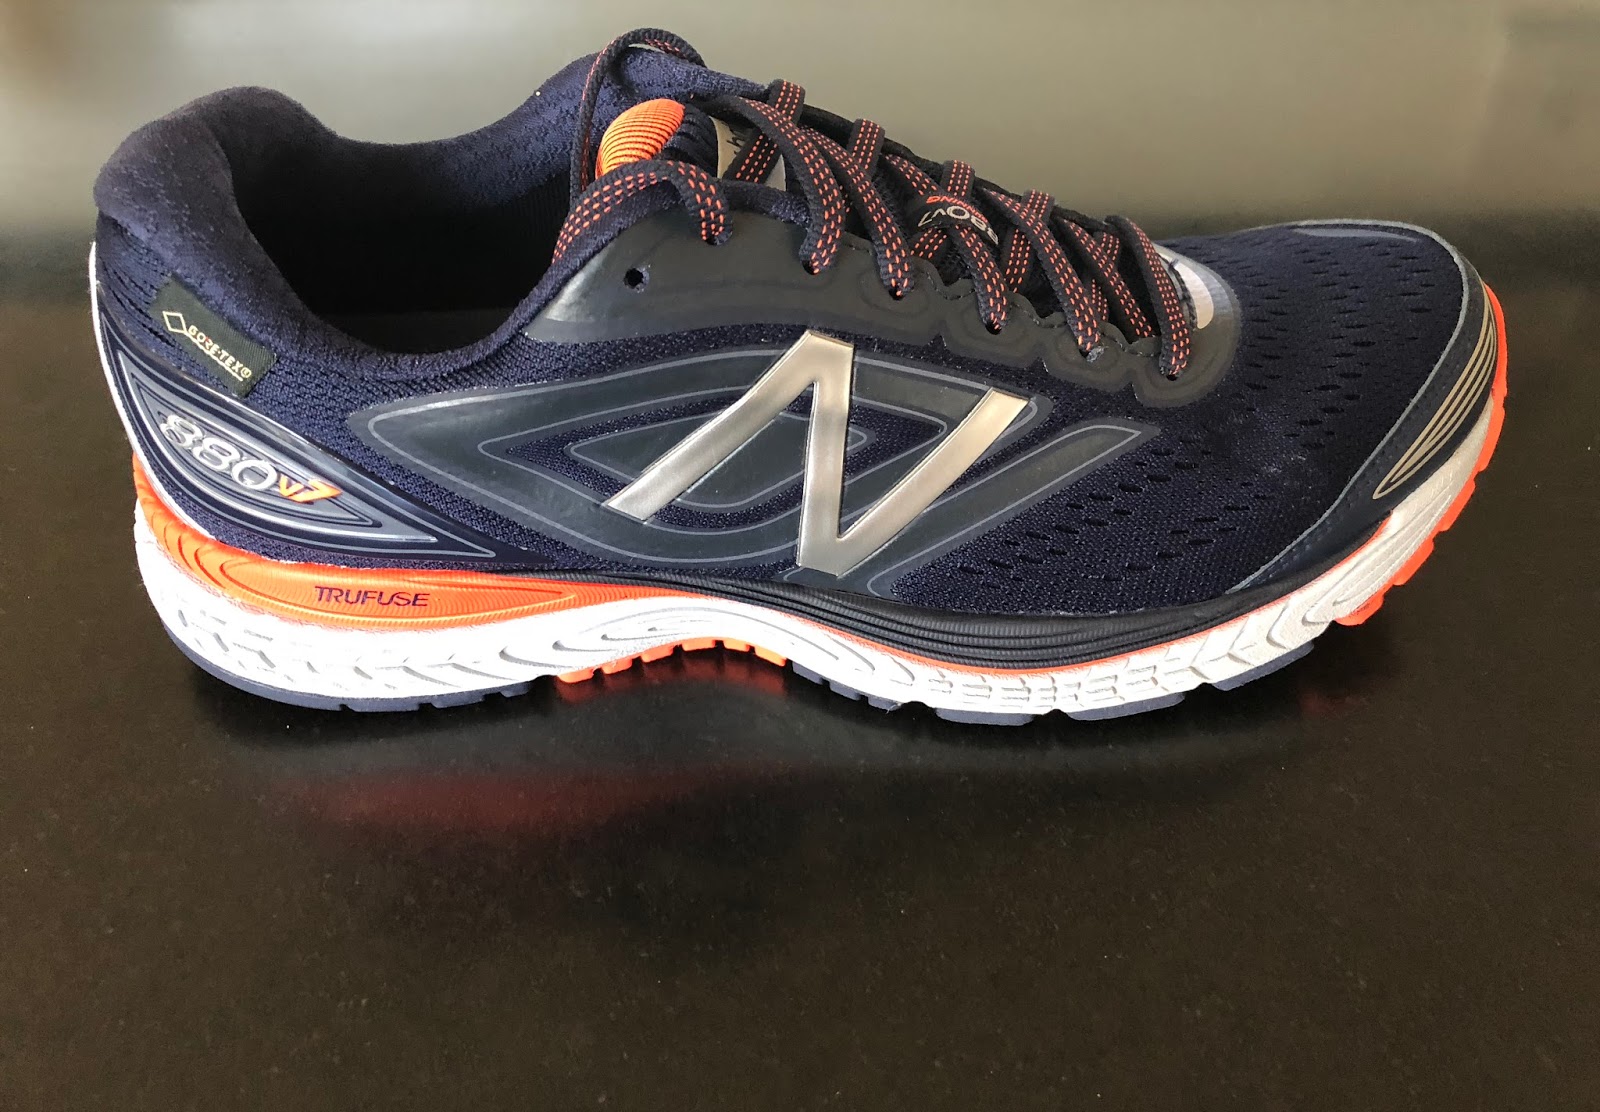 Contable Memorándum expedido Road Trail Run: New Balance 880v7 GTX Review: Stalwart, Substantial,  Durable Trainer